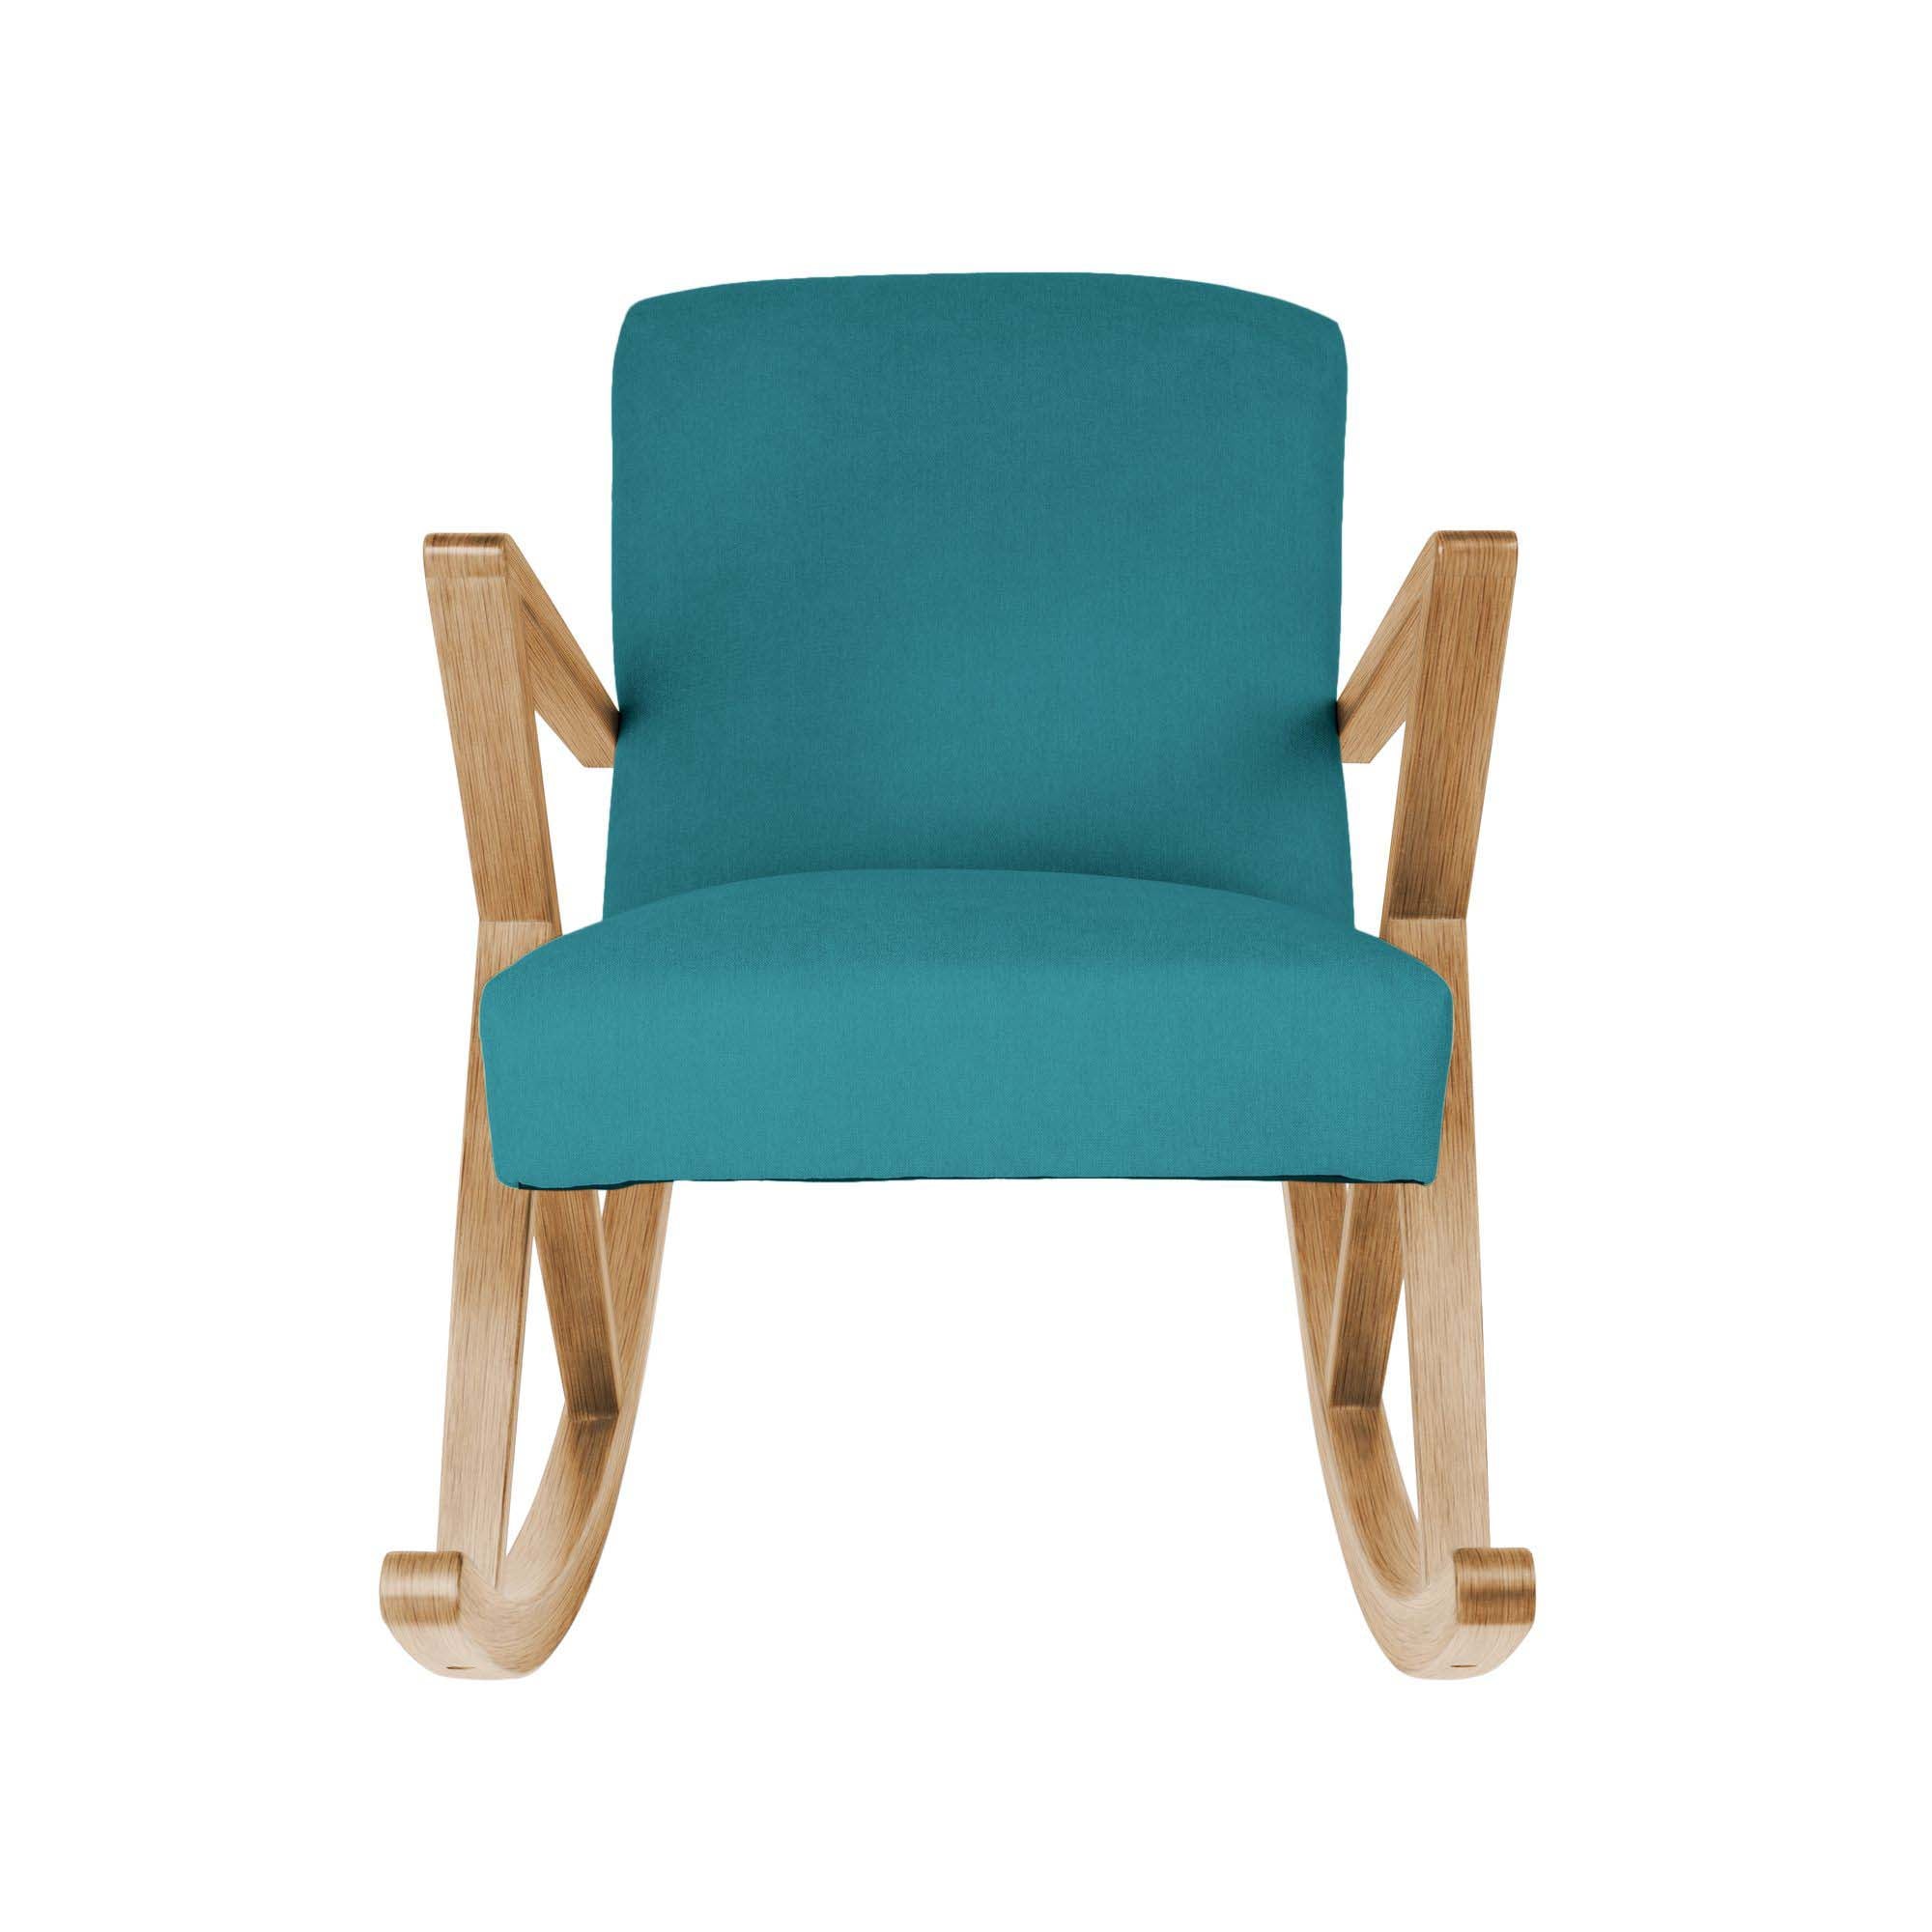 Rocking Chair, Oak Wood Frame, Natural Colour blue fabric, front view